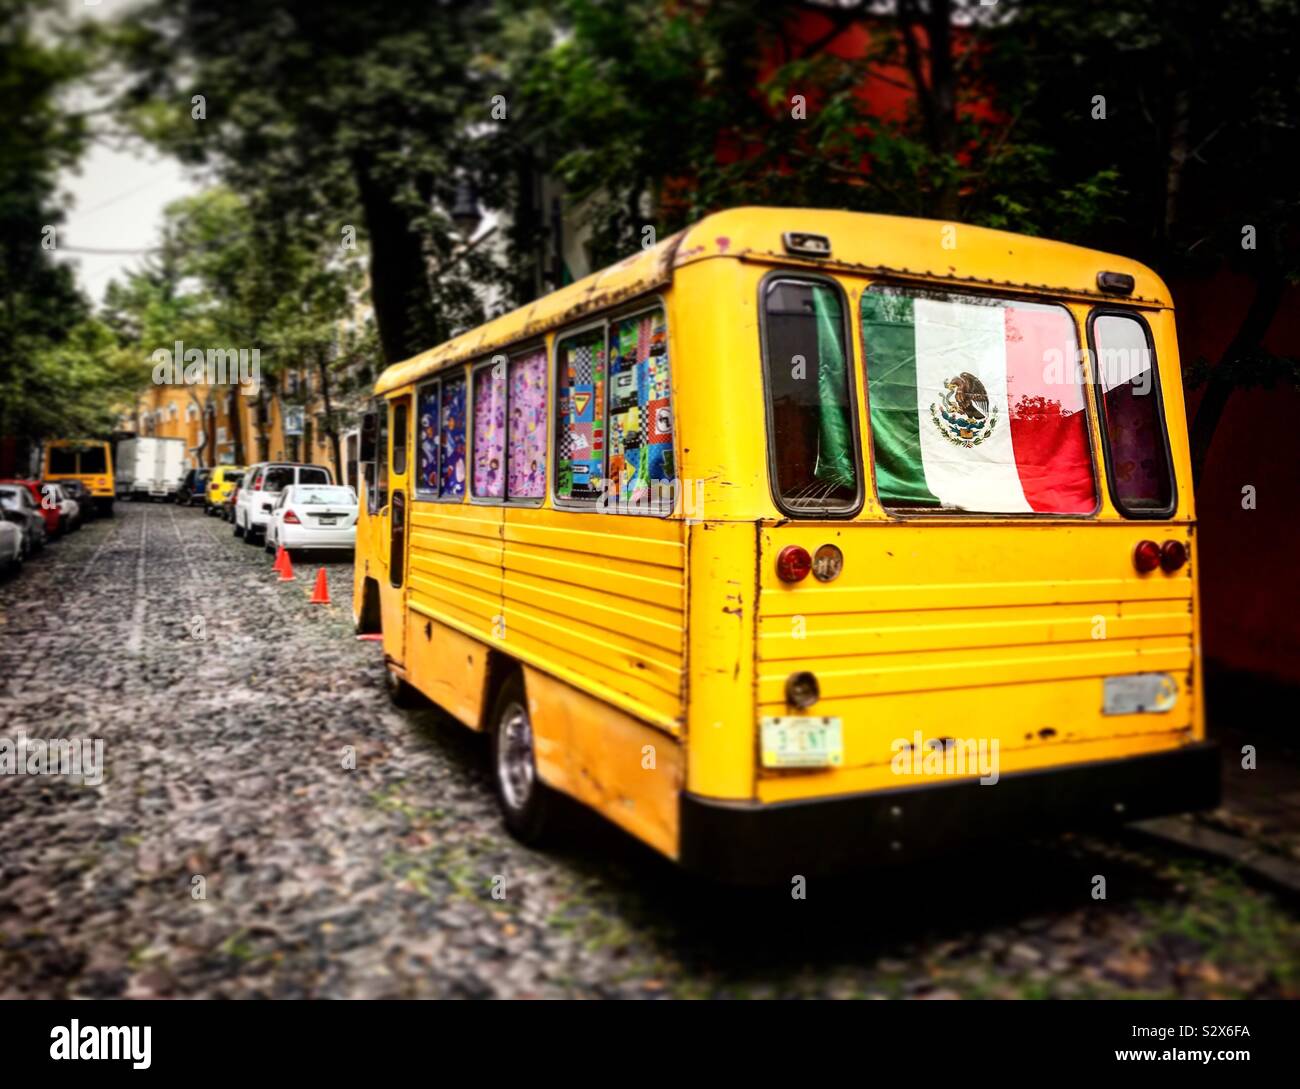 A yellow bus decorated with the Mexican flag in a street of San Angel, Mexico City, Mexico Stock Photo